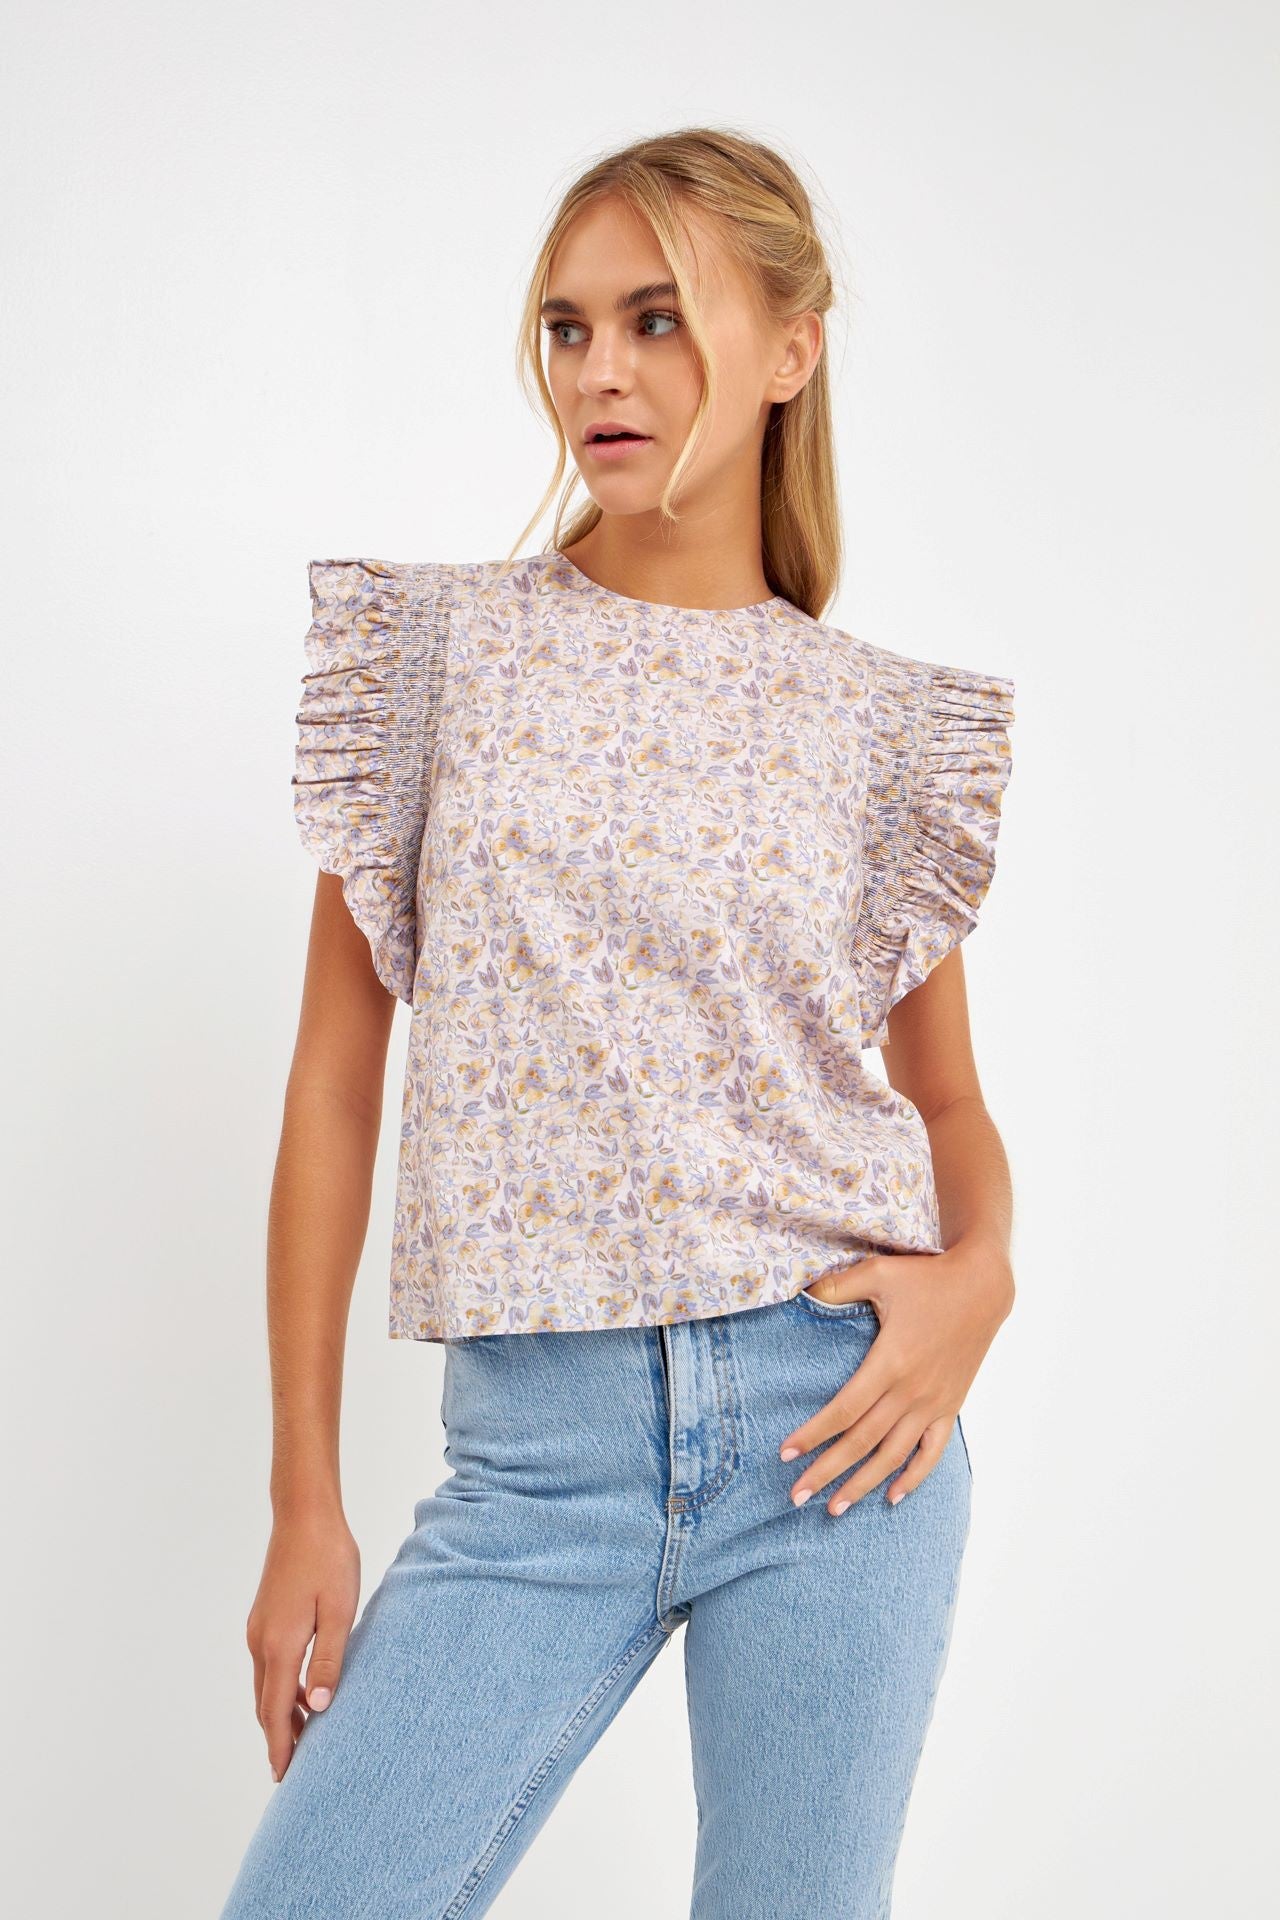 English FactoryLily Floral Top - Polish Boutique